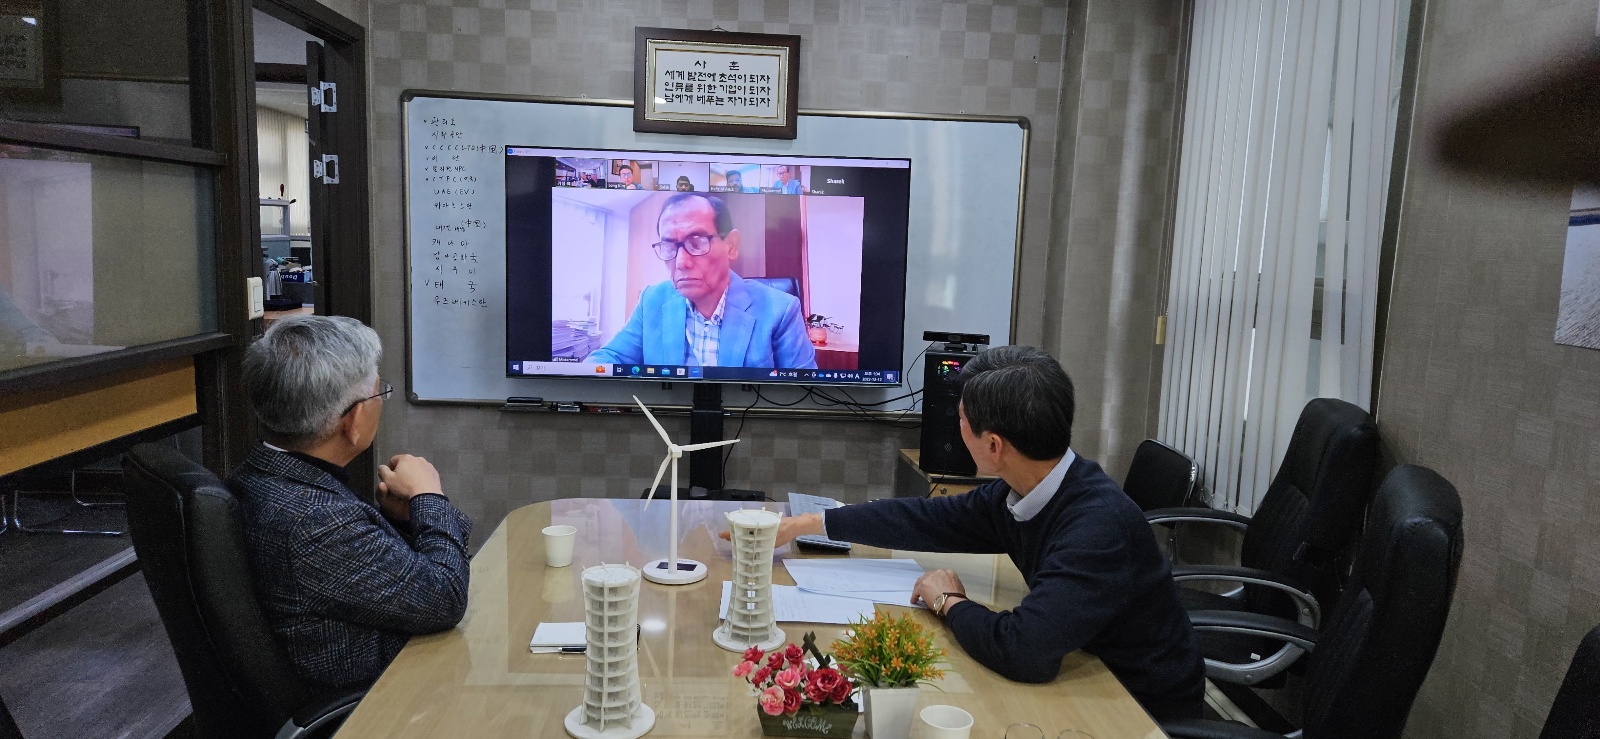 Video conference with Bangladesh Summit Group Mozammel and three others on ODIN introduction and business cooperation plans(23.12.12) 이미지